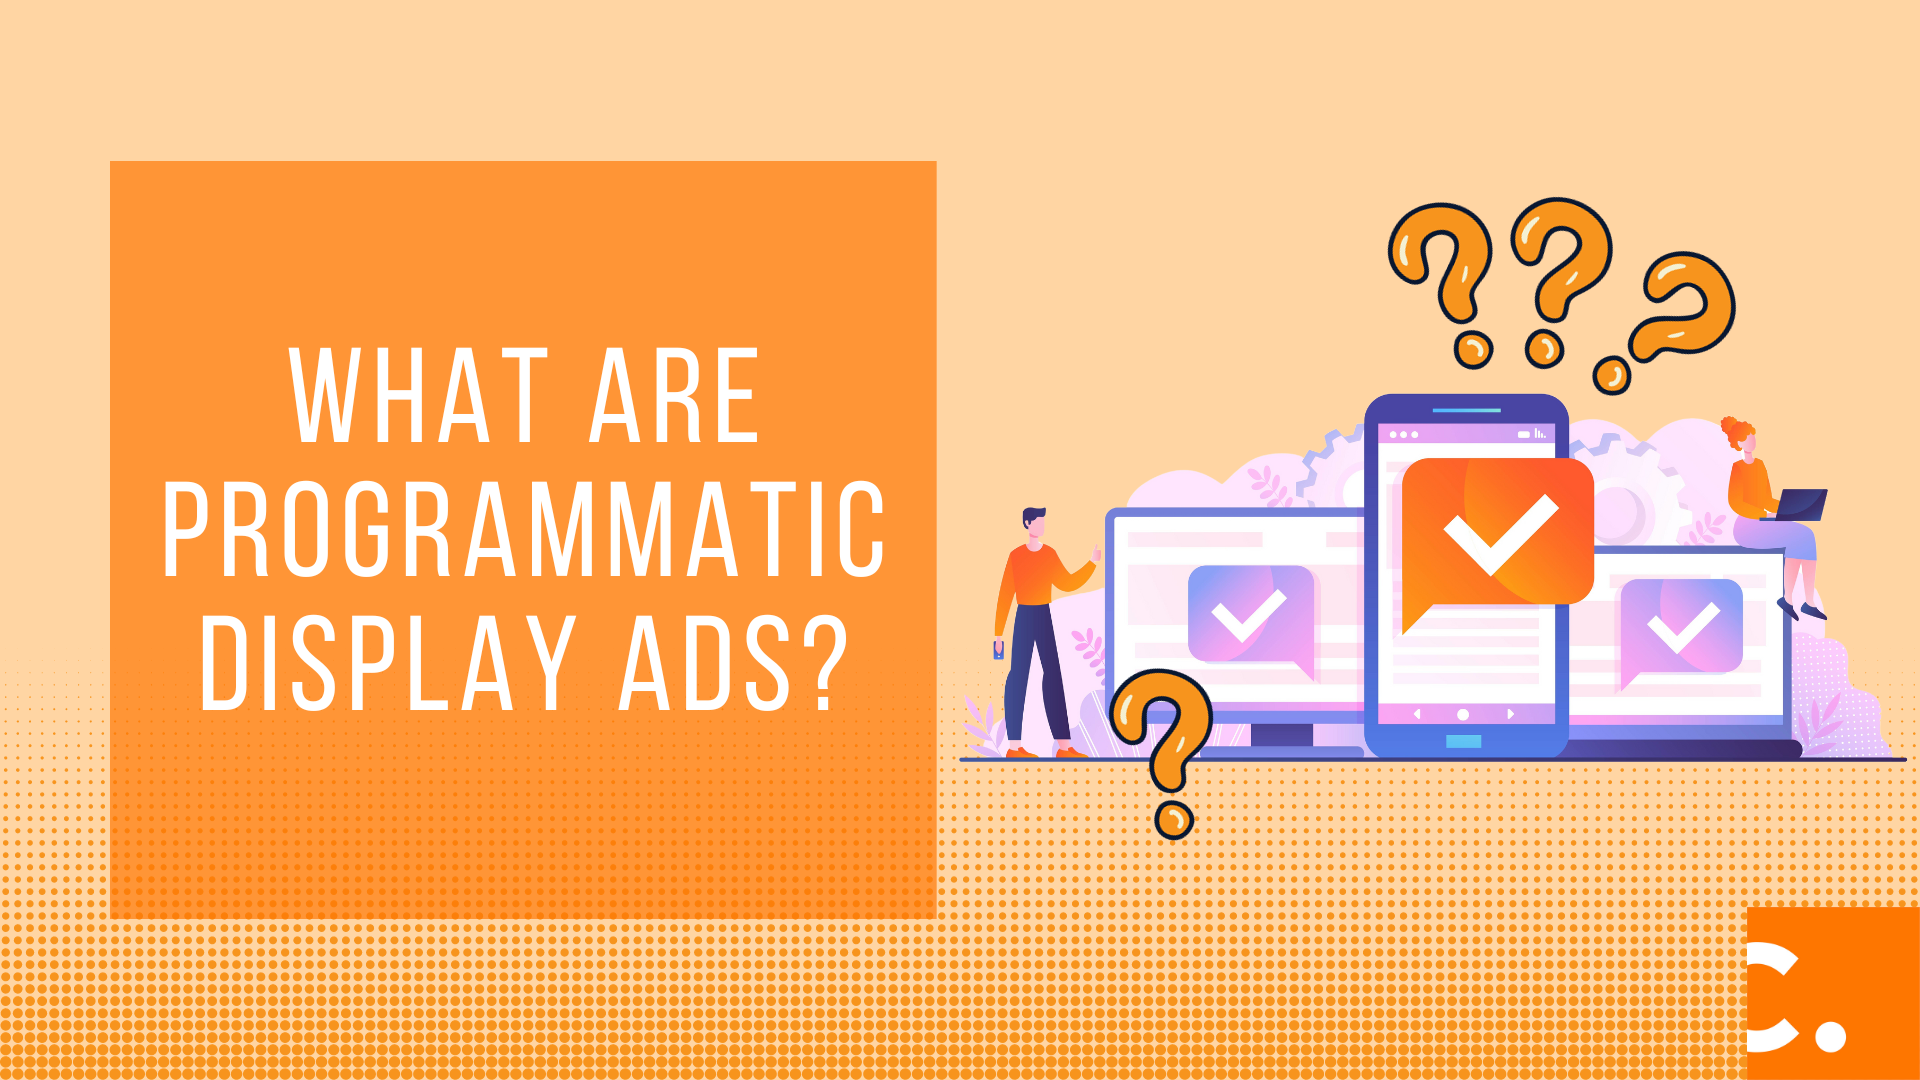 What are programmatic display ads